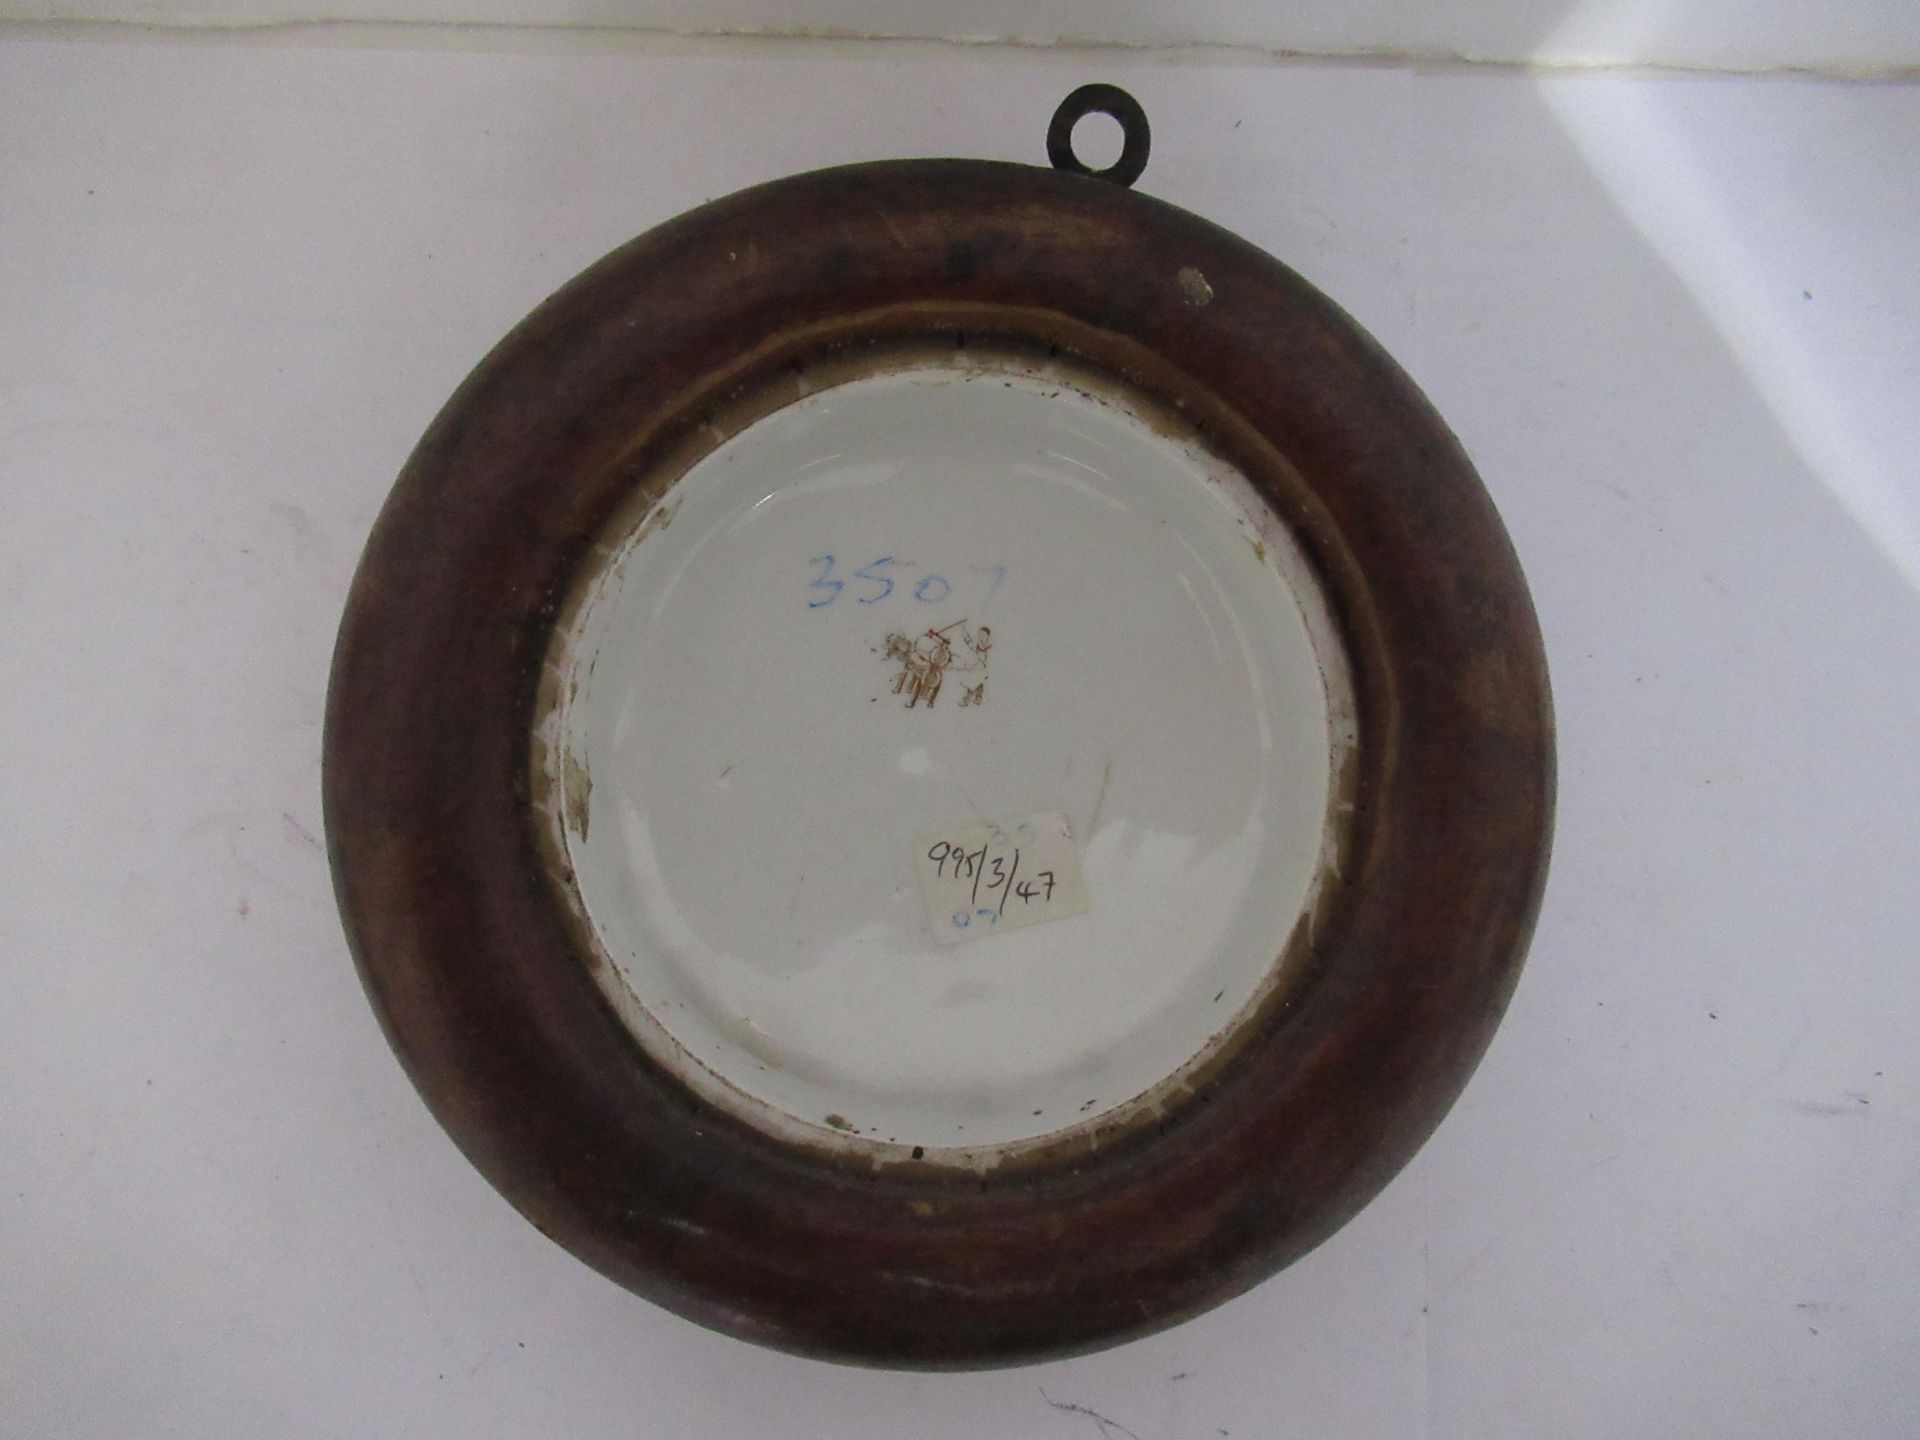 6x Prattware ceramic lids in wooden mounts including 'P.Wouvermann Pinx', 'Lend a Bite', 'Fording Th - Image 10 of 12